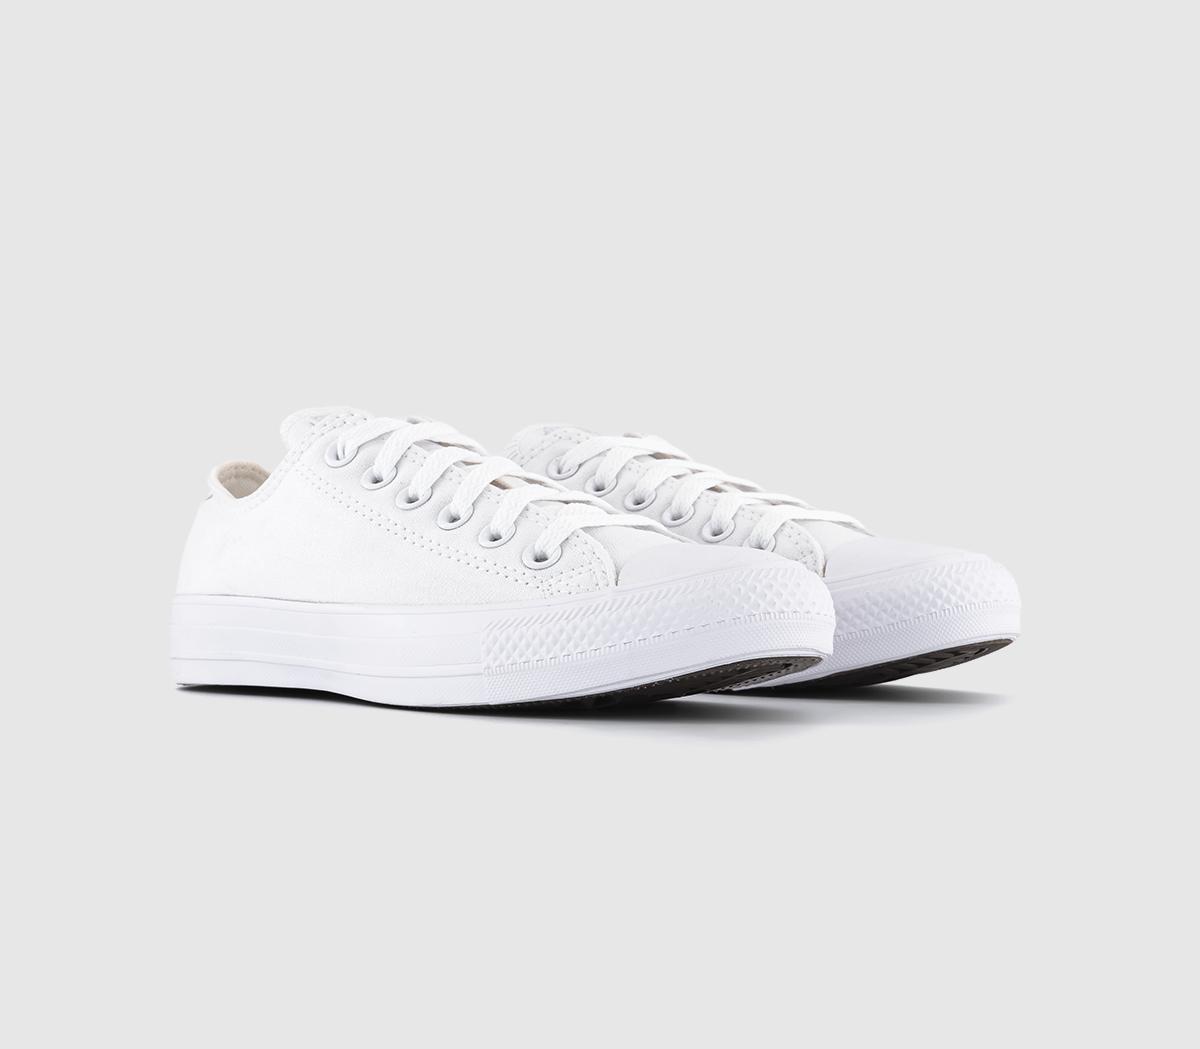 Converse Iconic All Star Low White Mono Canvas Hi Top Trainers, 4.5